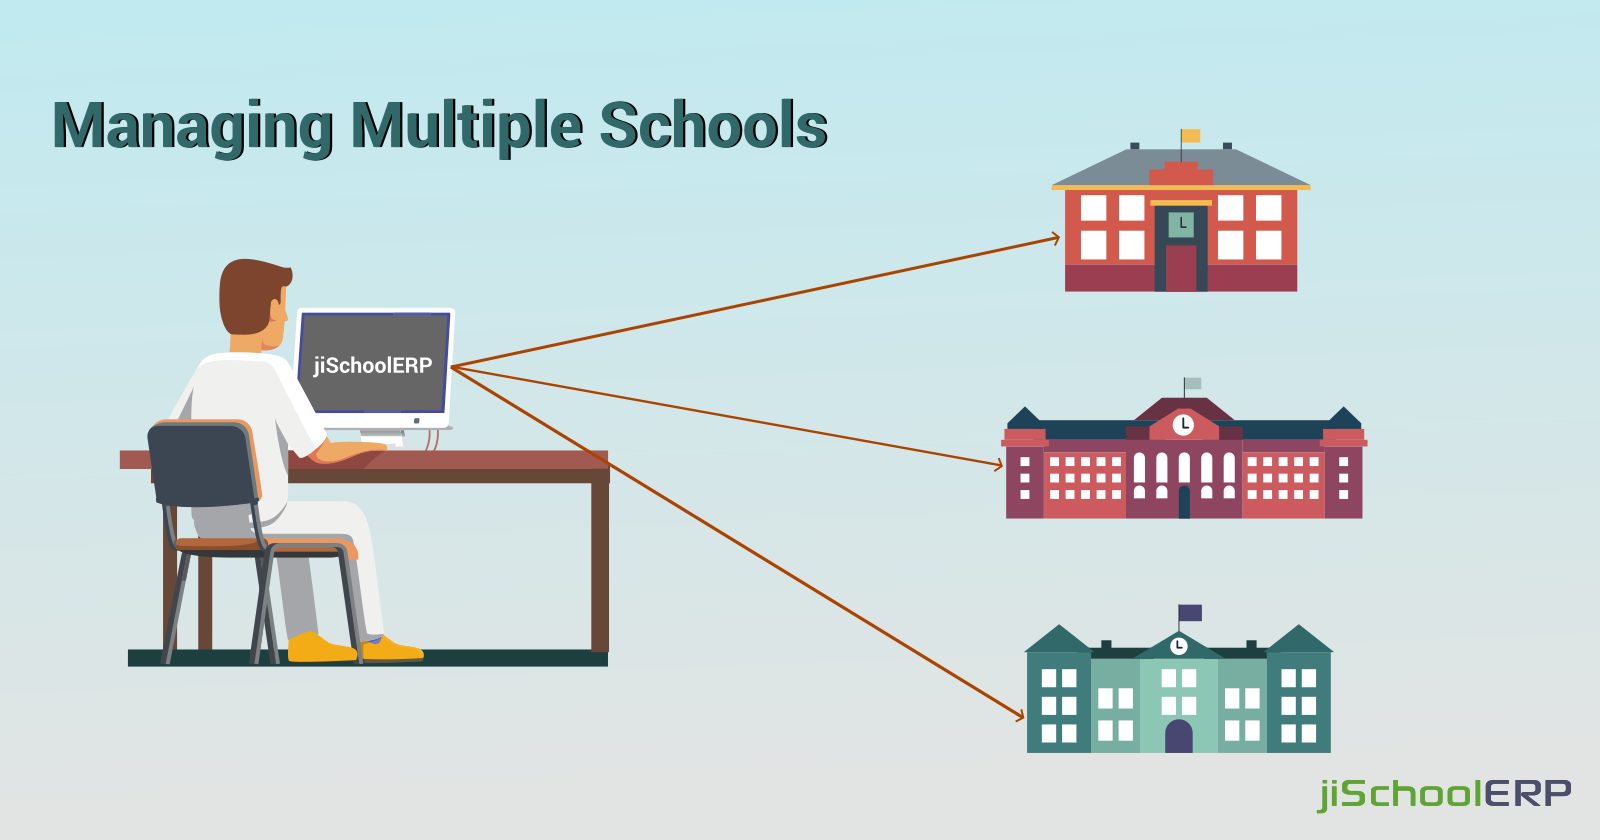 Features to Look for in a Multi-School Management Solution